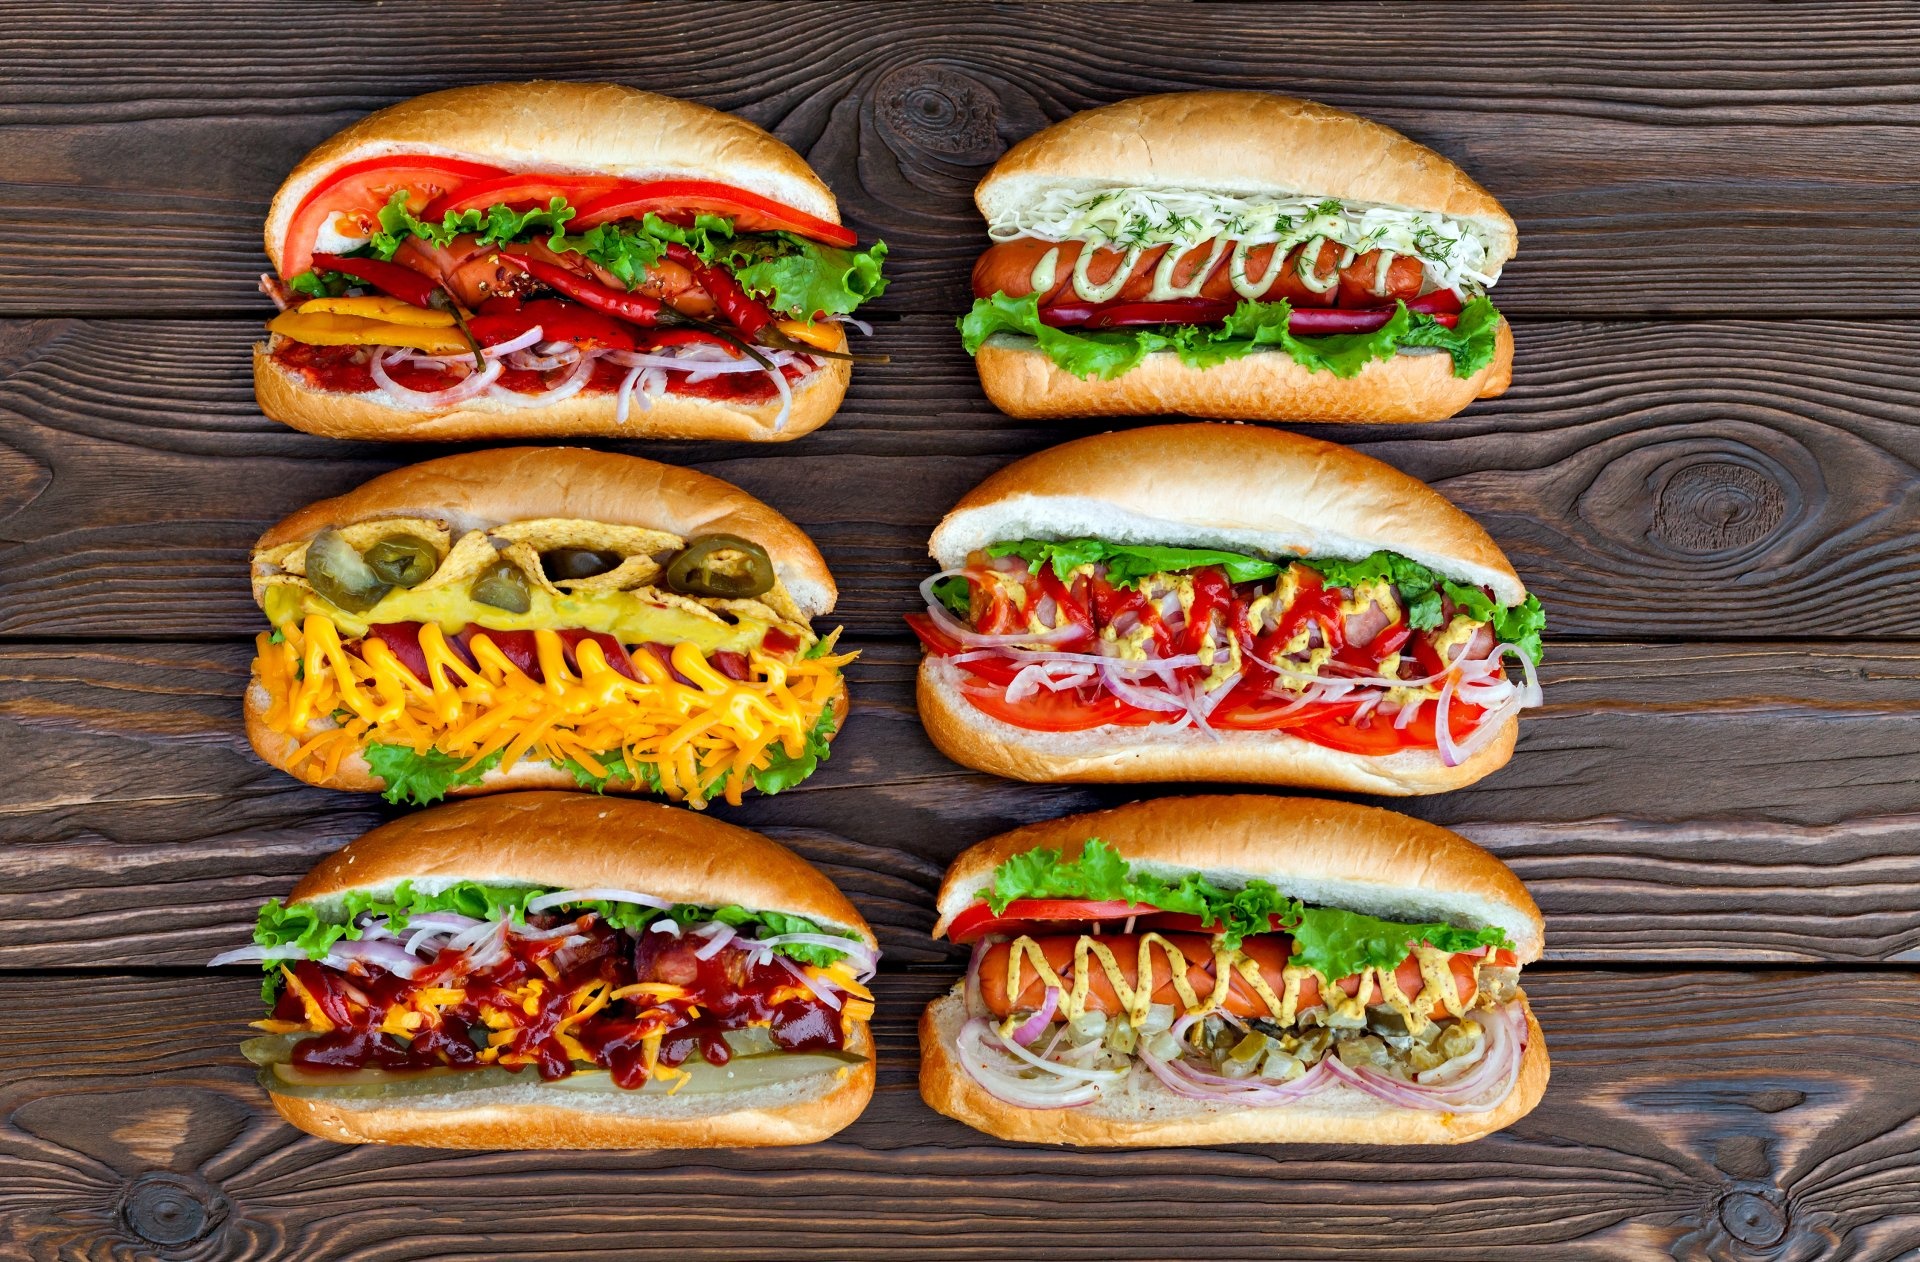 Hot dog HD wallpapers, Vibrant backgrounds, Food photography, Culinary art, 1920x1270 HD Desktop